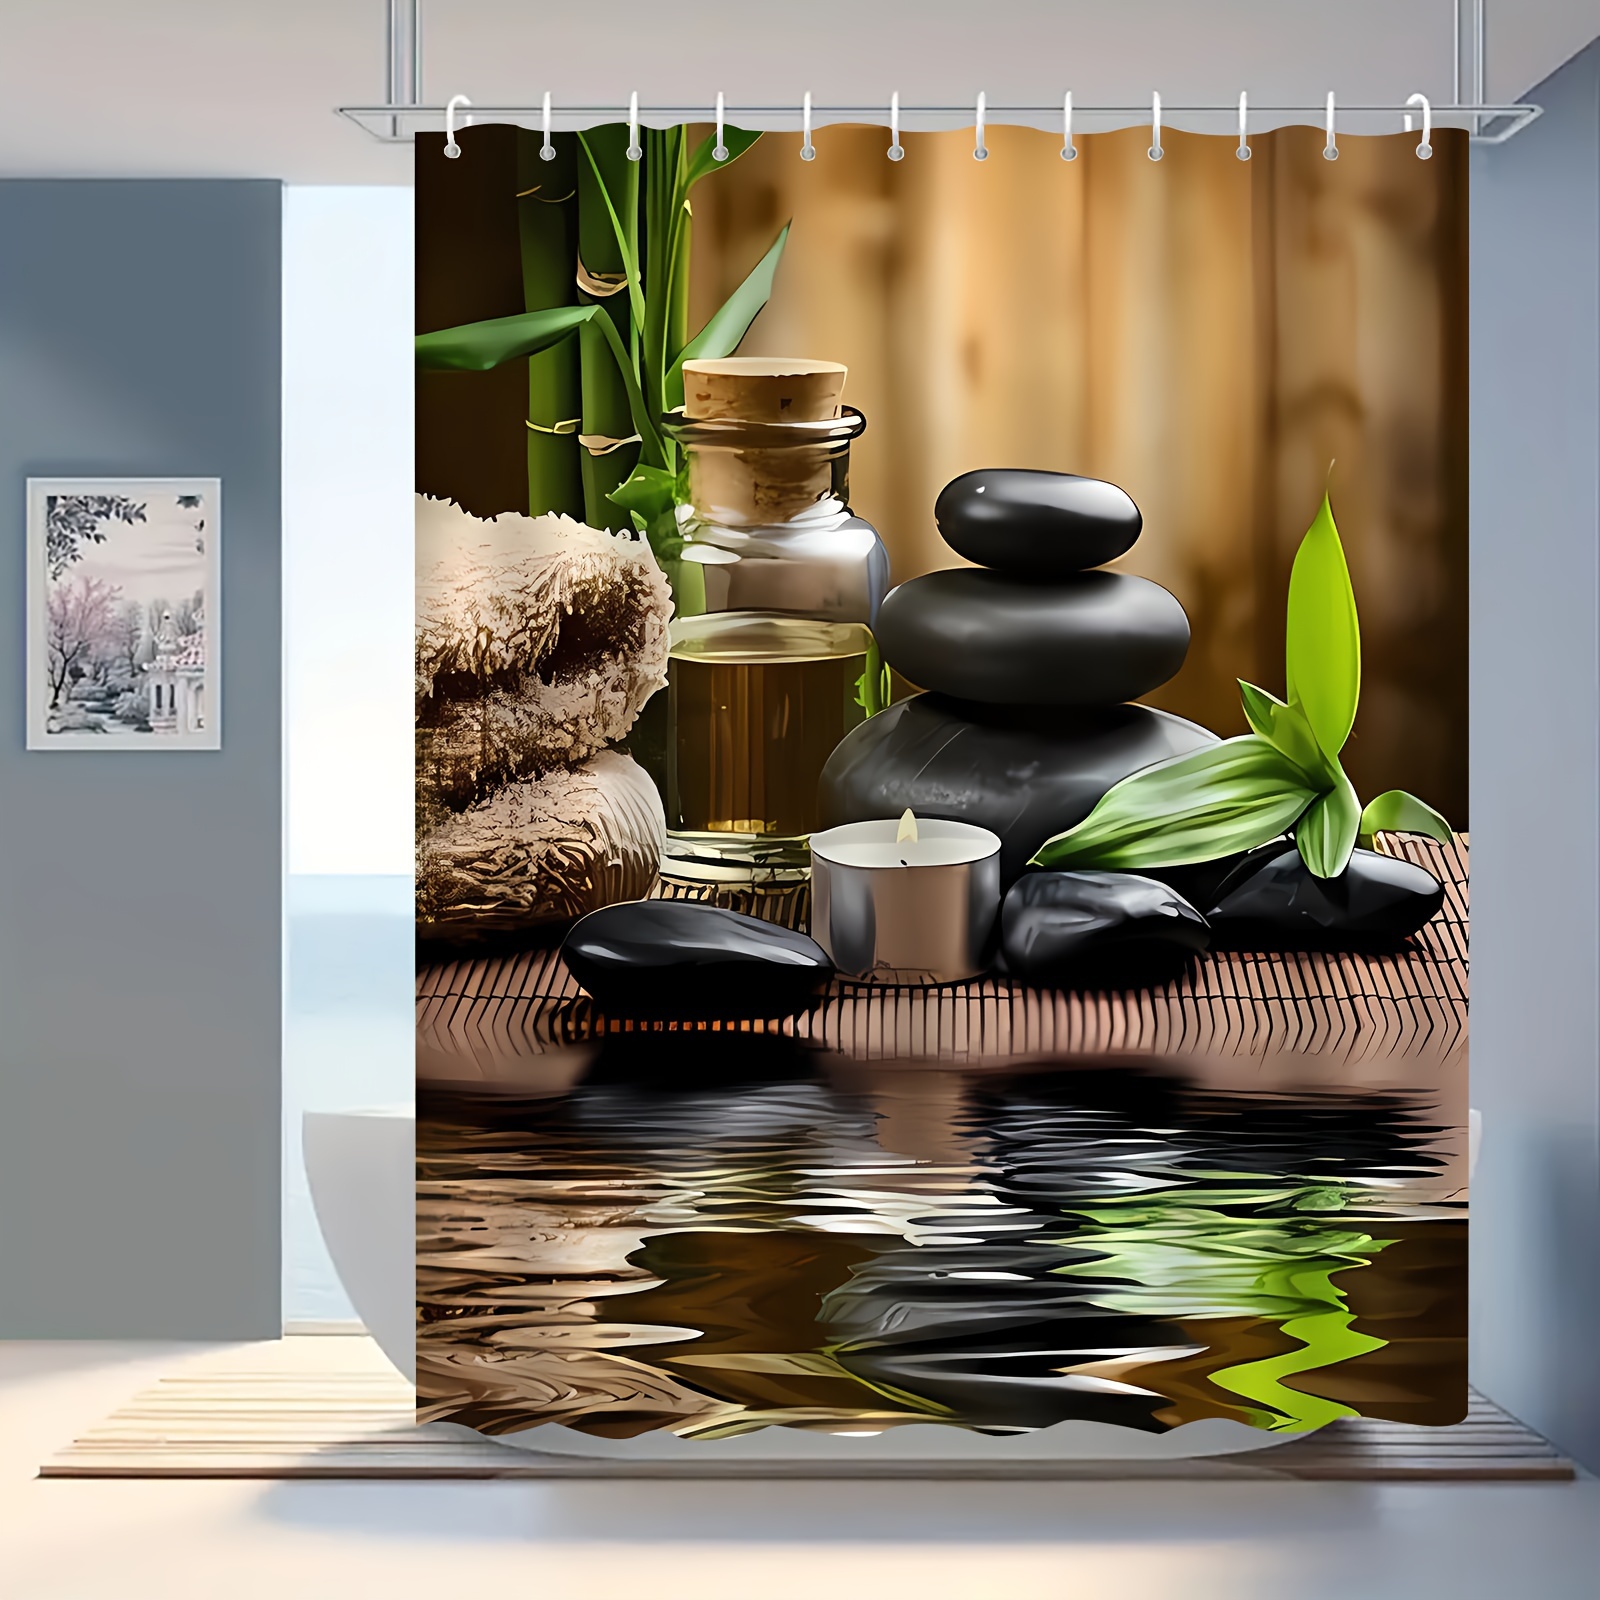 

1pc, Zen Stone Pattern Shower Curtain, Polyester Fabric Bathroom Decor With 12 Hooks, Waterproof Machine Washable Bath Tub Curtain For Home Decor, Available In Multiple Sizes